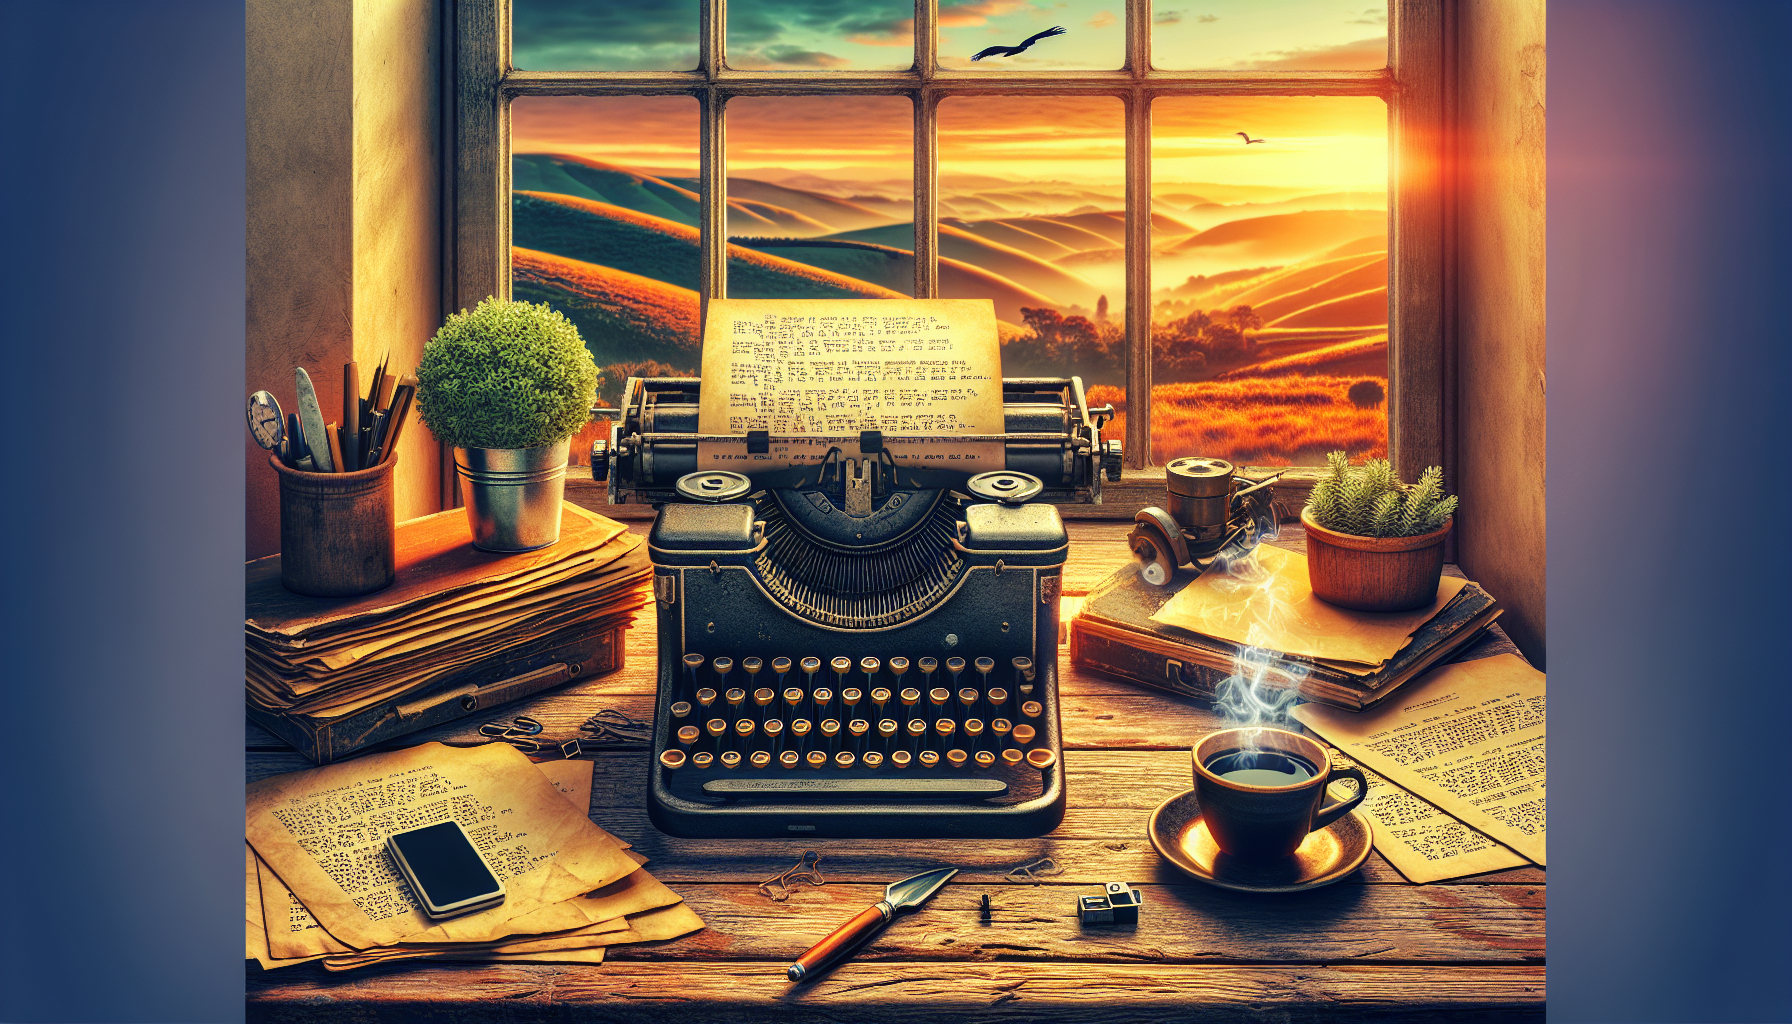 An imaginative image of a vintage typewriter placed on a rustic wooden desk surrounded by scattered screenplay pages, a steaming coffee cup, and a small potted plant, with a window in the background s